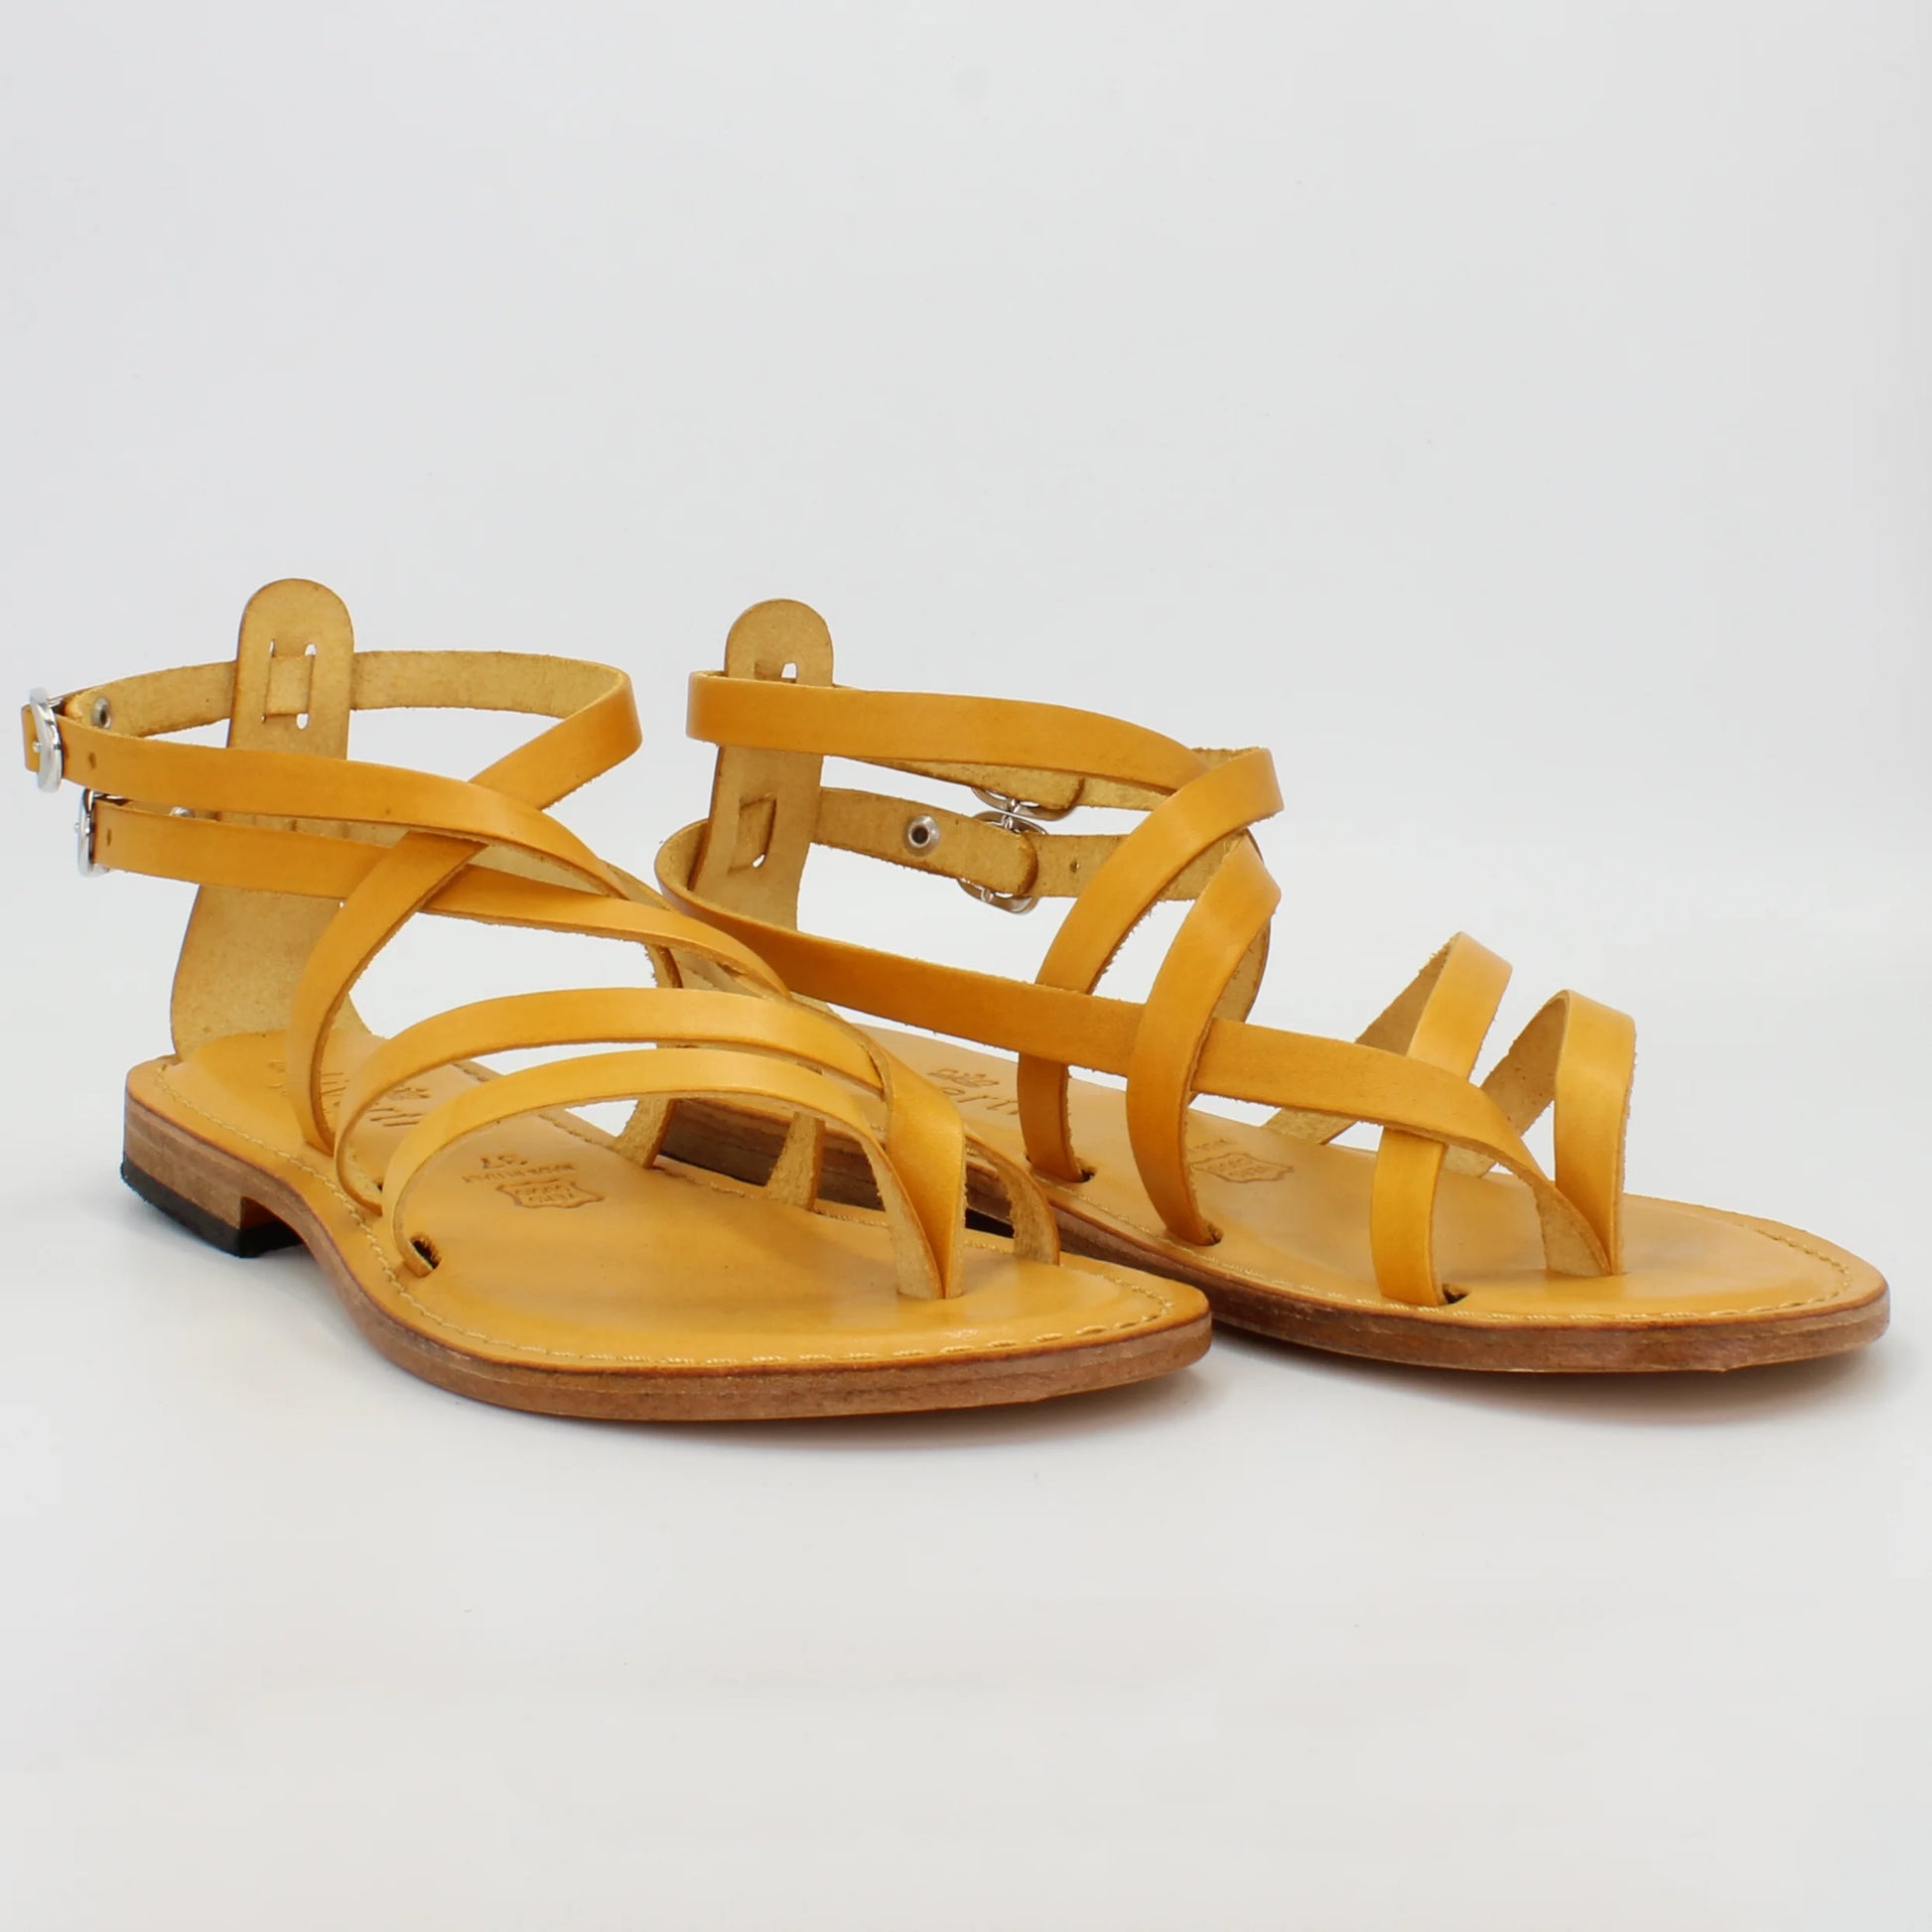 Shop Handmade Italian Leather sandal in giallo (1560) or browse our range of hand-made Italian shoes in leather or suede in-store at Aliverti Cape Town, or shop online. We deliver in South Africa & offer multiple payment plans as well as accept multiple safe & secure payment methods.